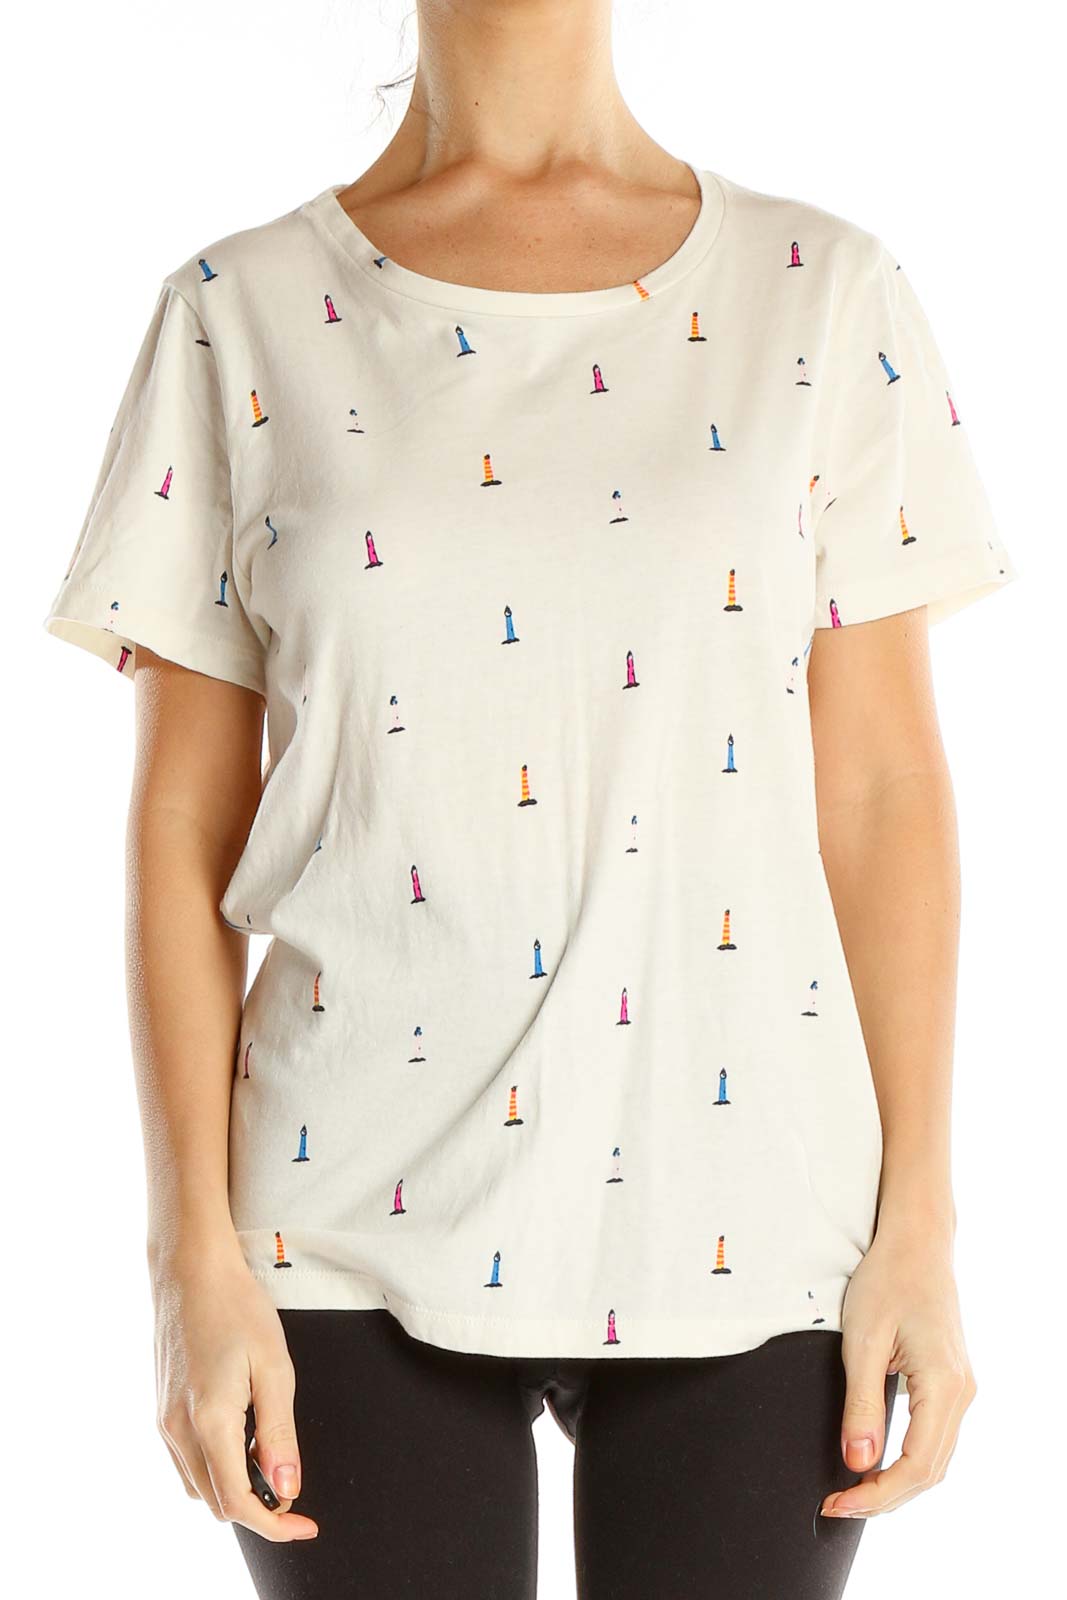 Beige Graphic Print Casual T-Shirt Front